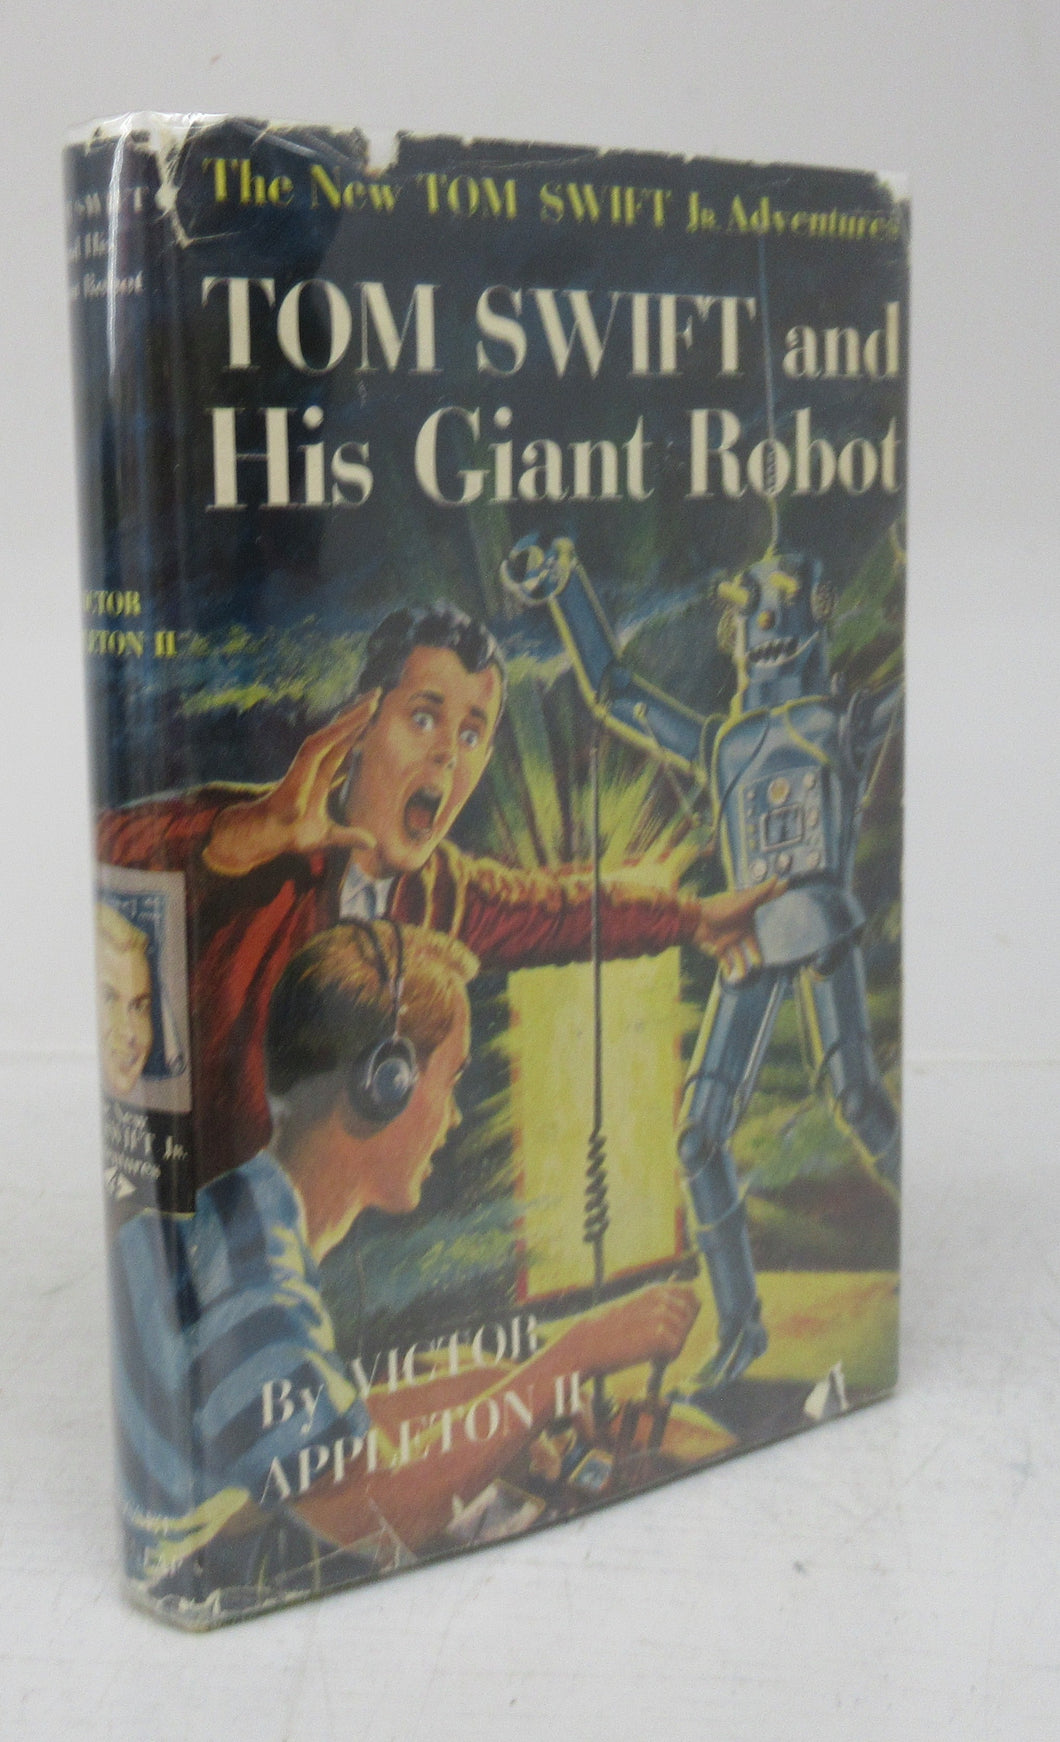 Tom Swift and His Giant Robot